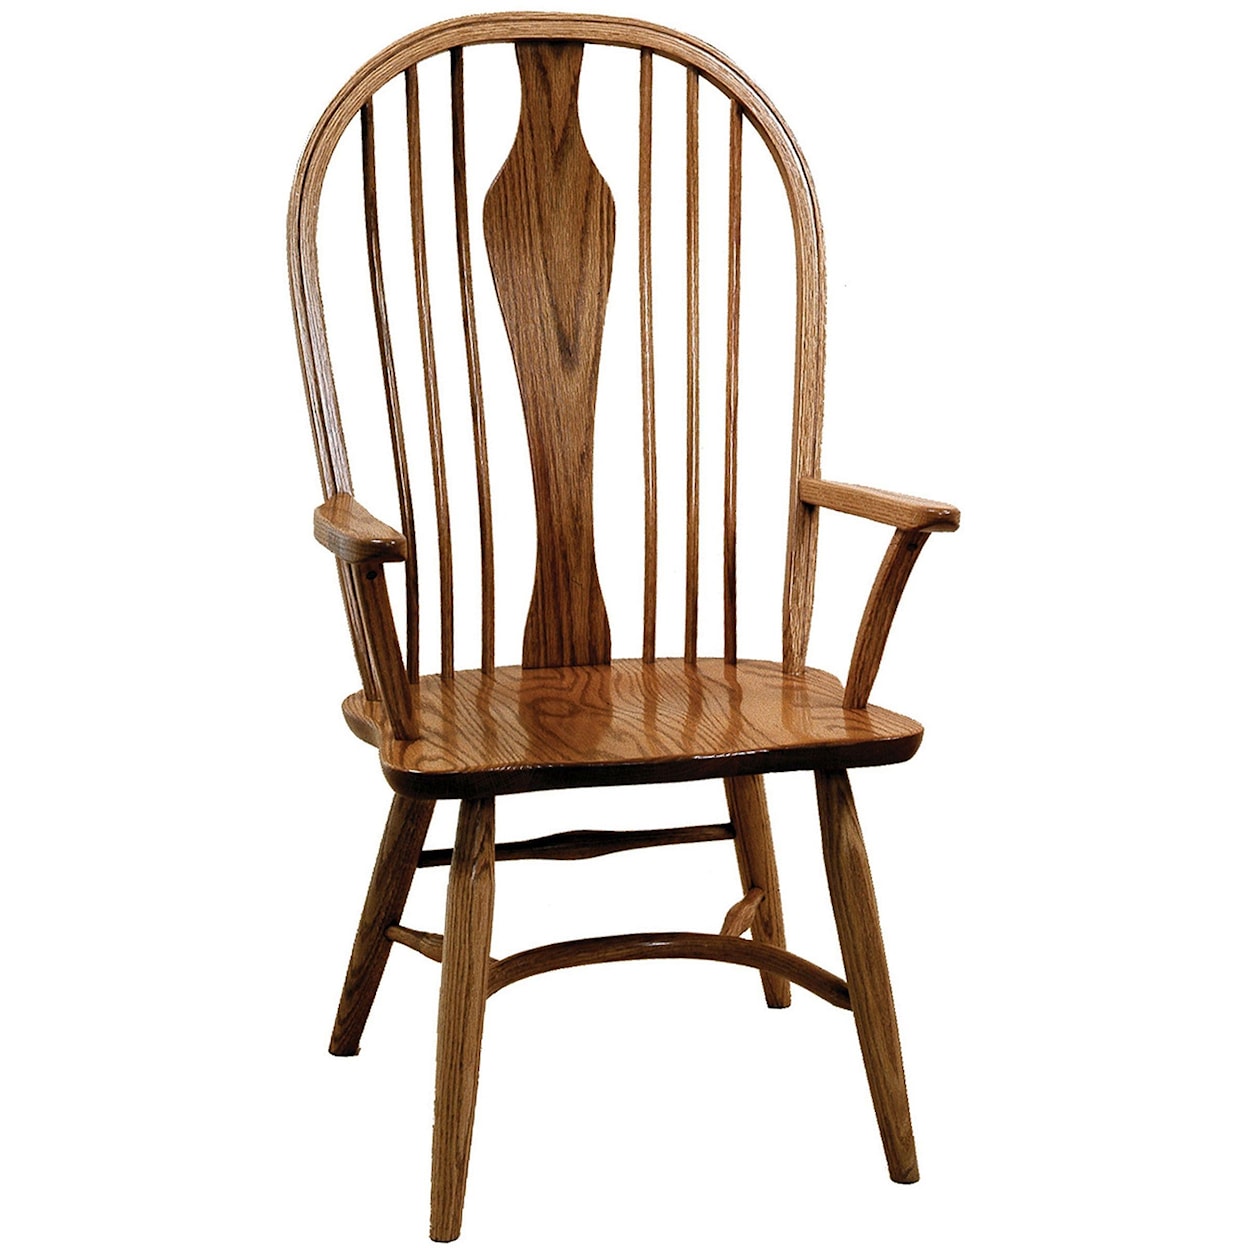 Wengerd Wood Products Bellaire Arm Chair